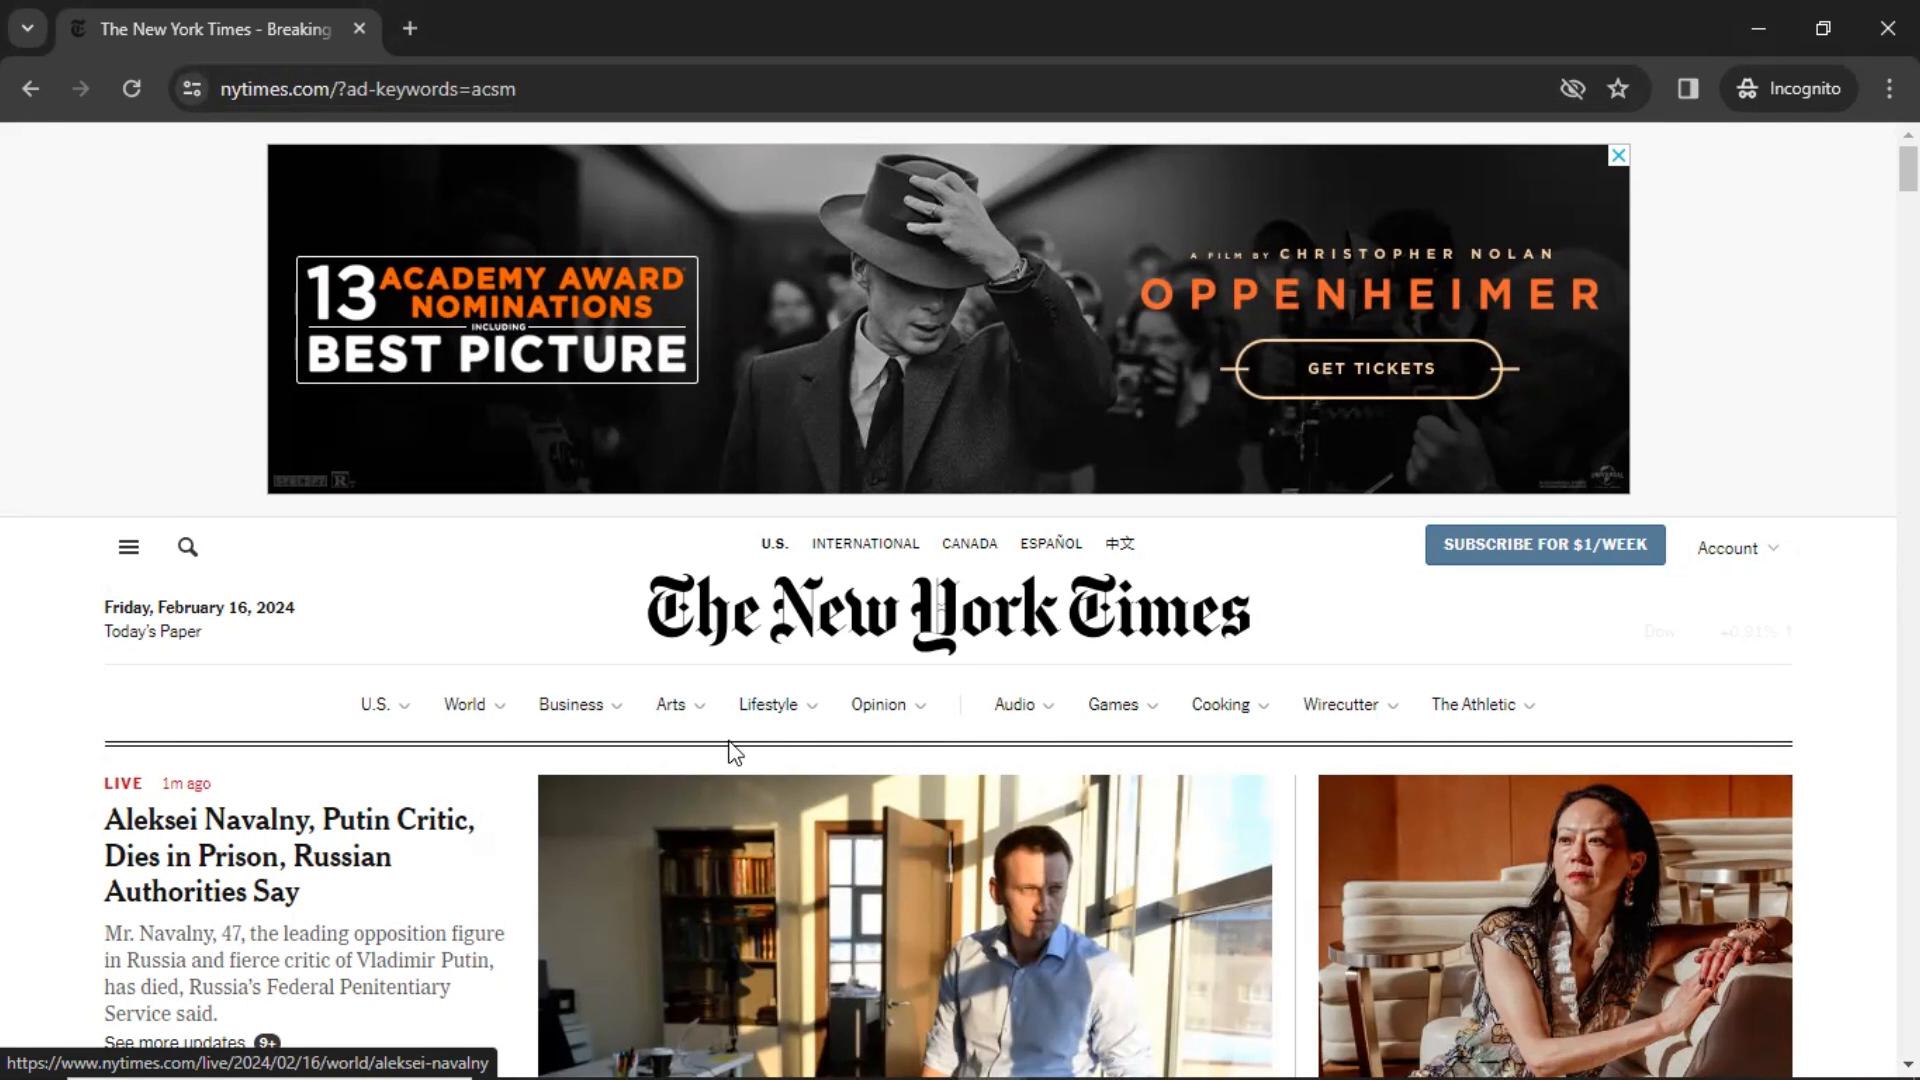 Discovering content on The New York Times video screenshot